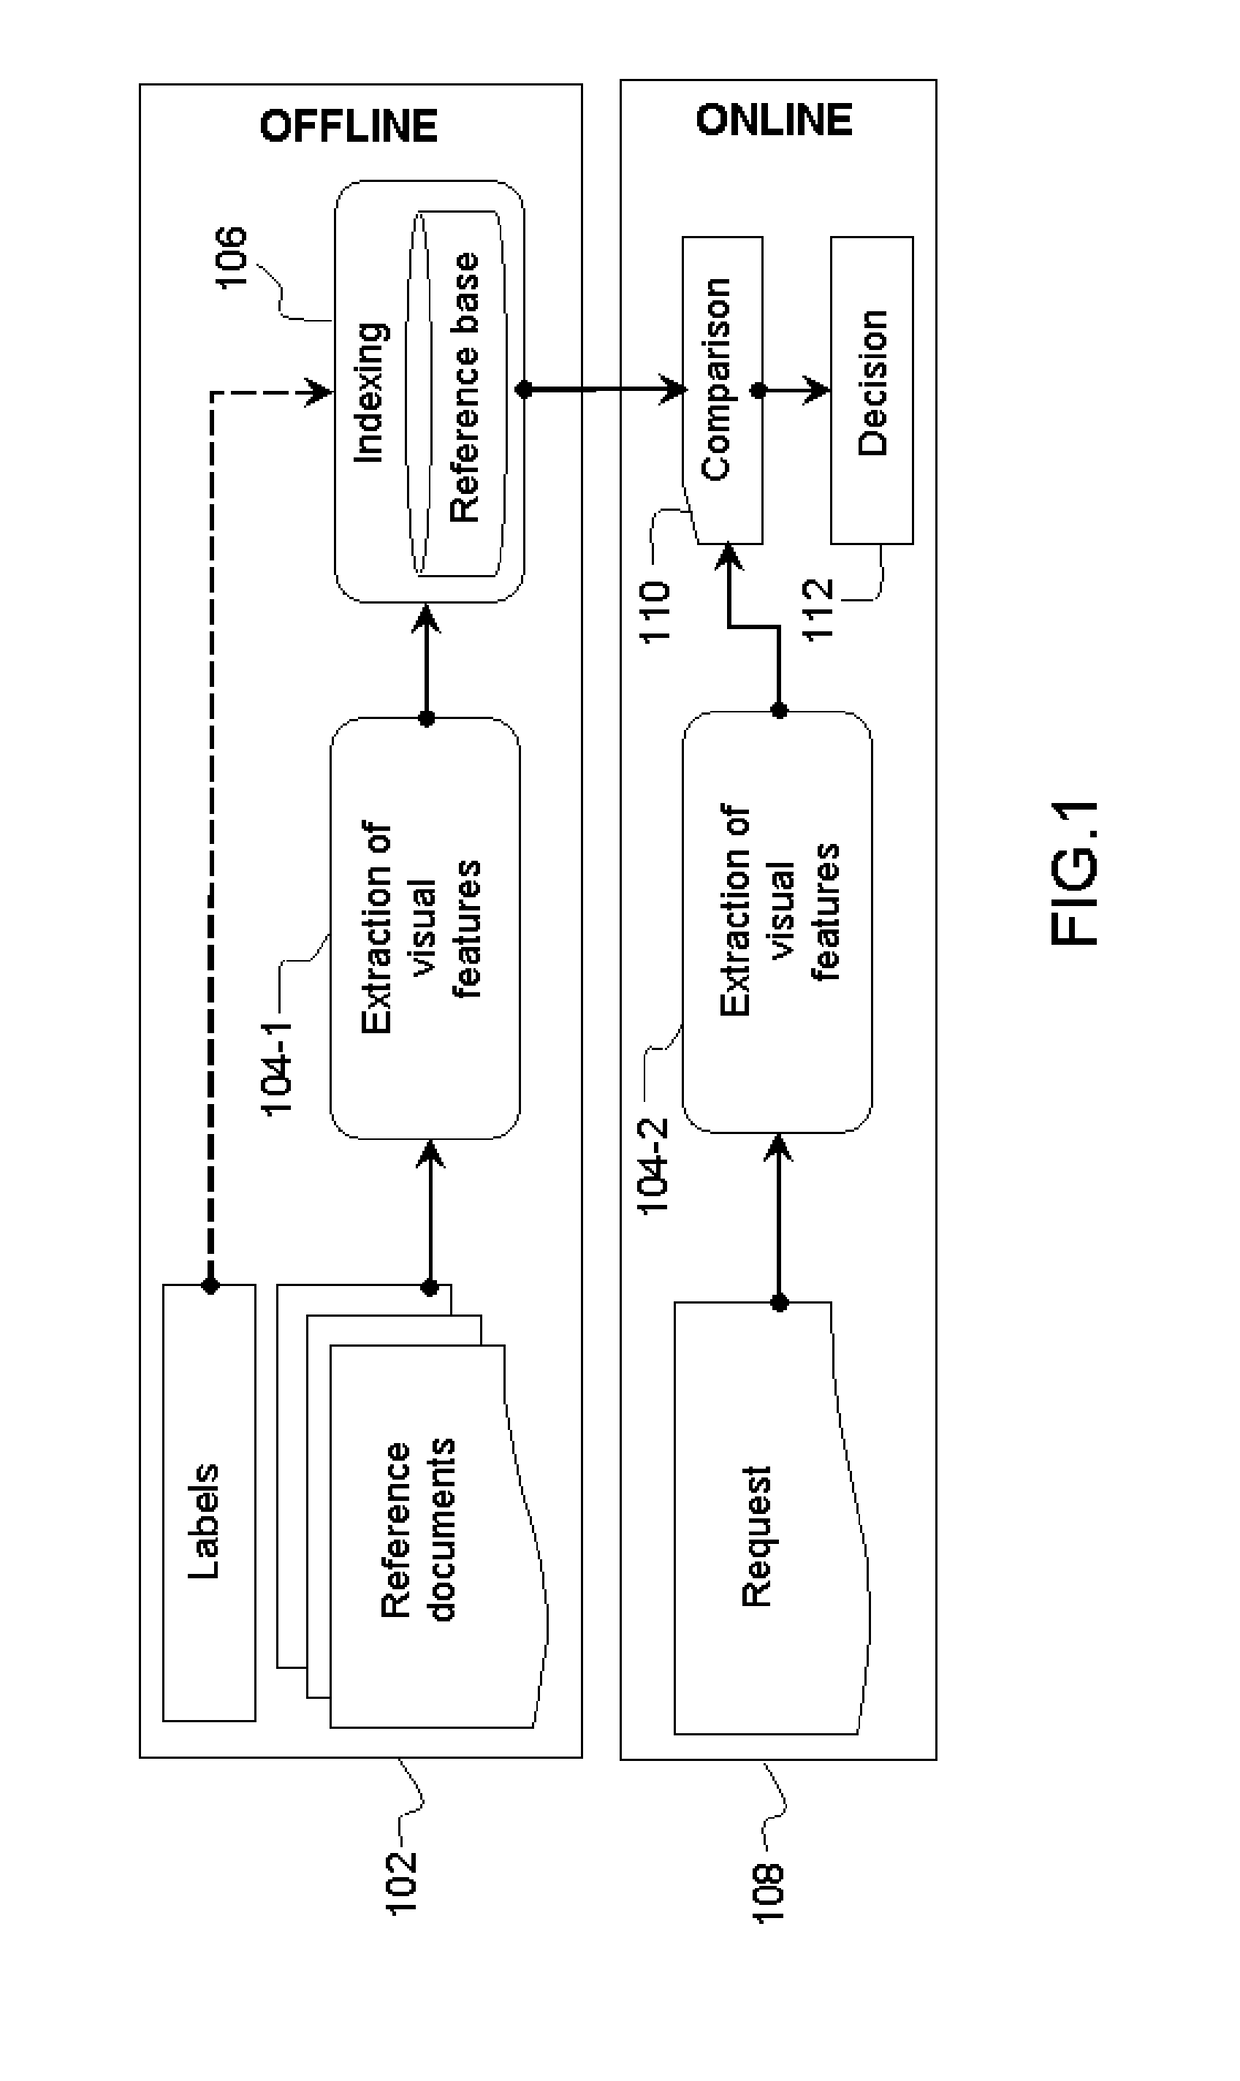 Method and device for detecting copies in a stream of visual data